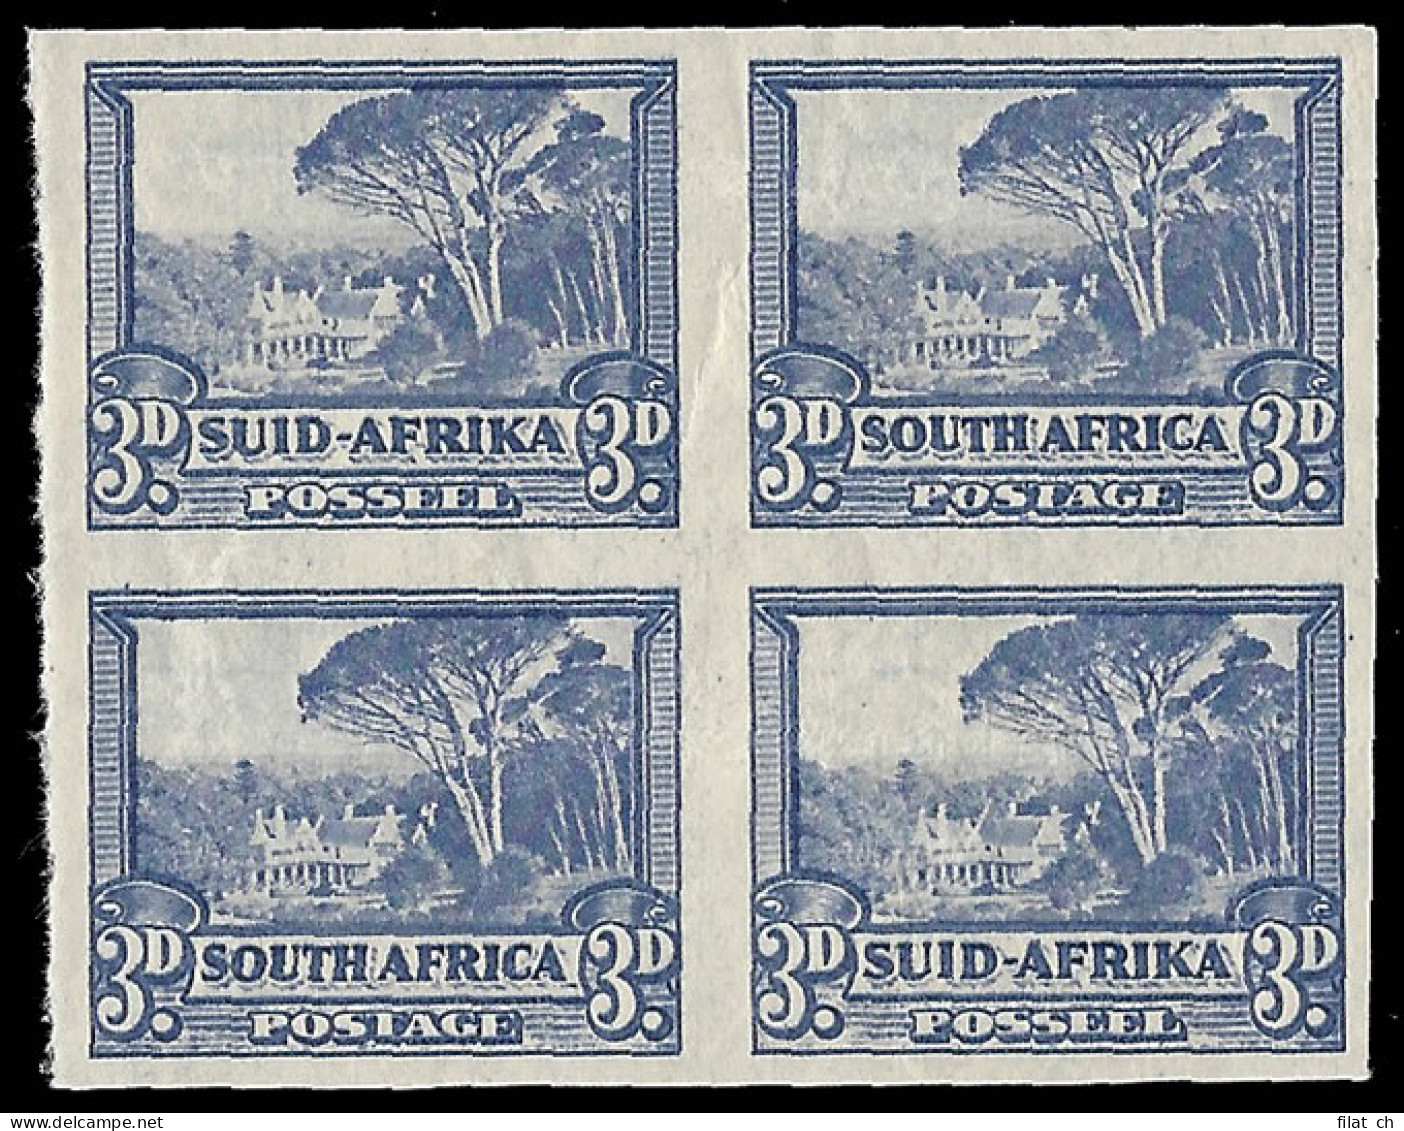 South Africa 1940 3d Umbrella Tree Imperf Block - Unclassified